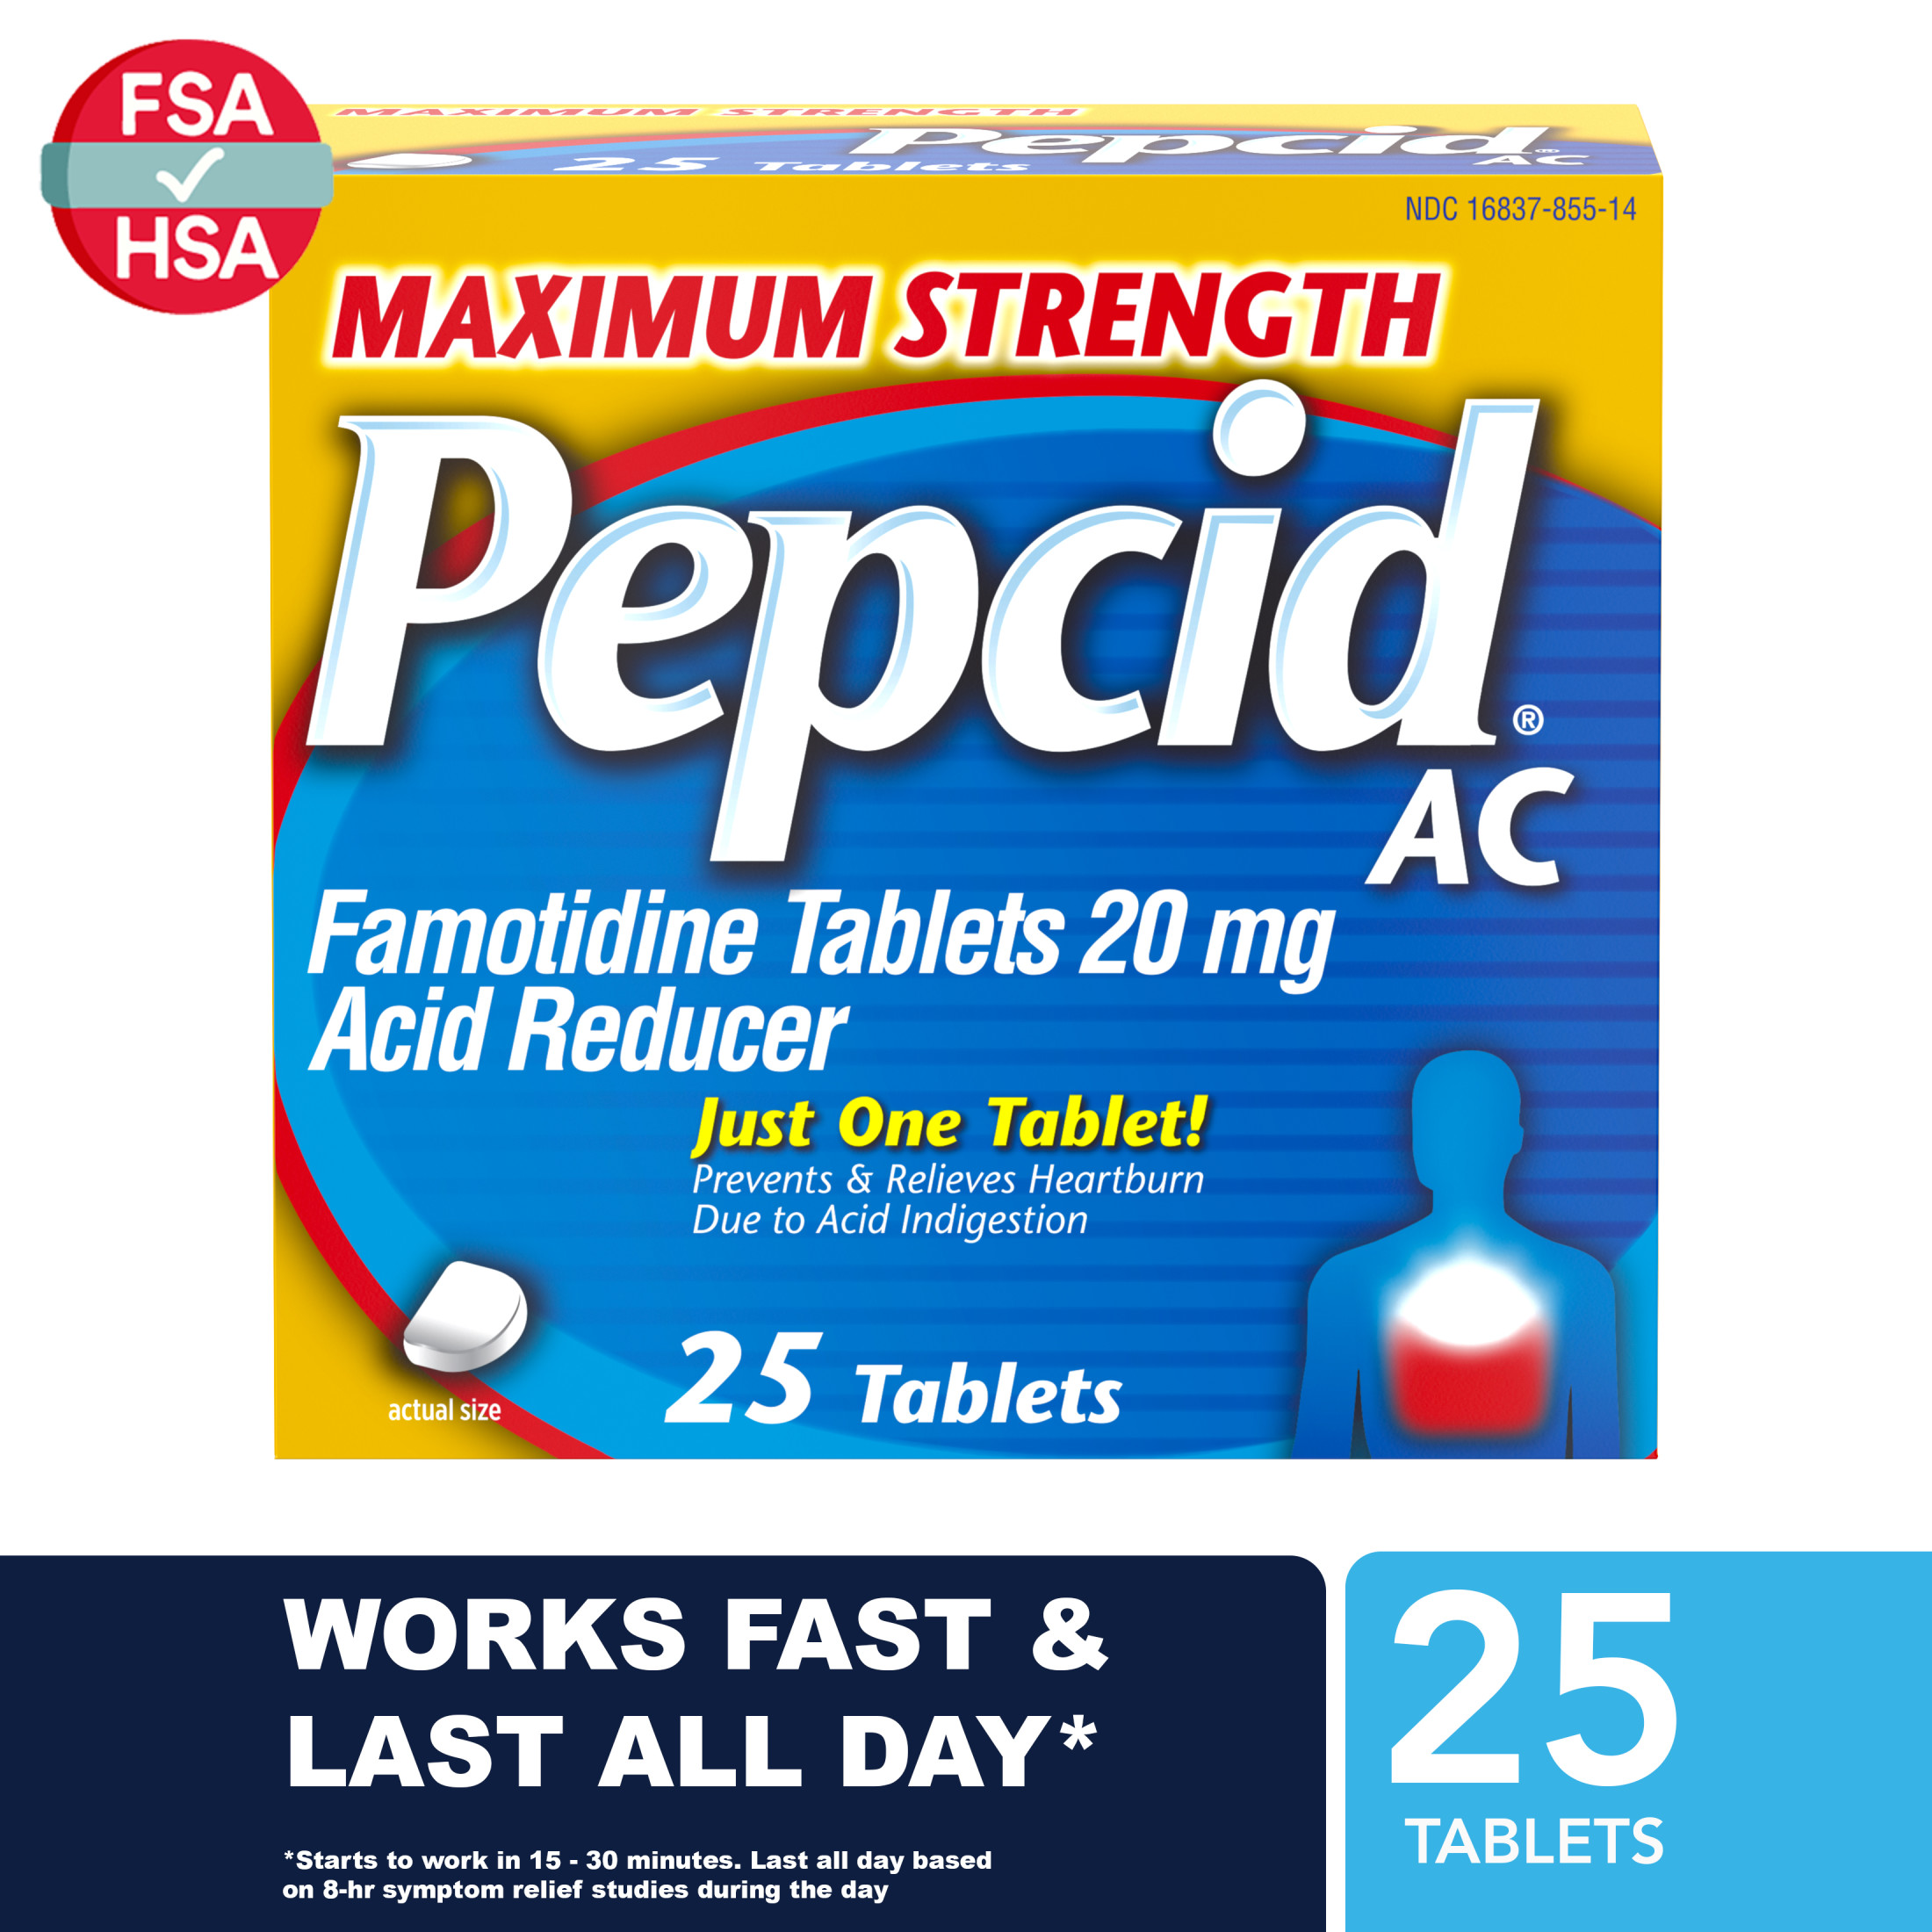 Pepcid AC Maximum Strength for Heartburn Prevention & Relief, 25 Ct - image 1 of 9